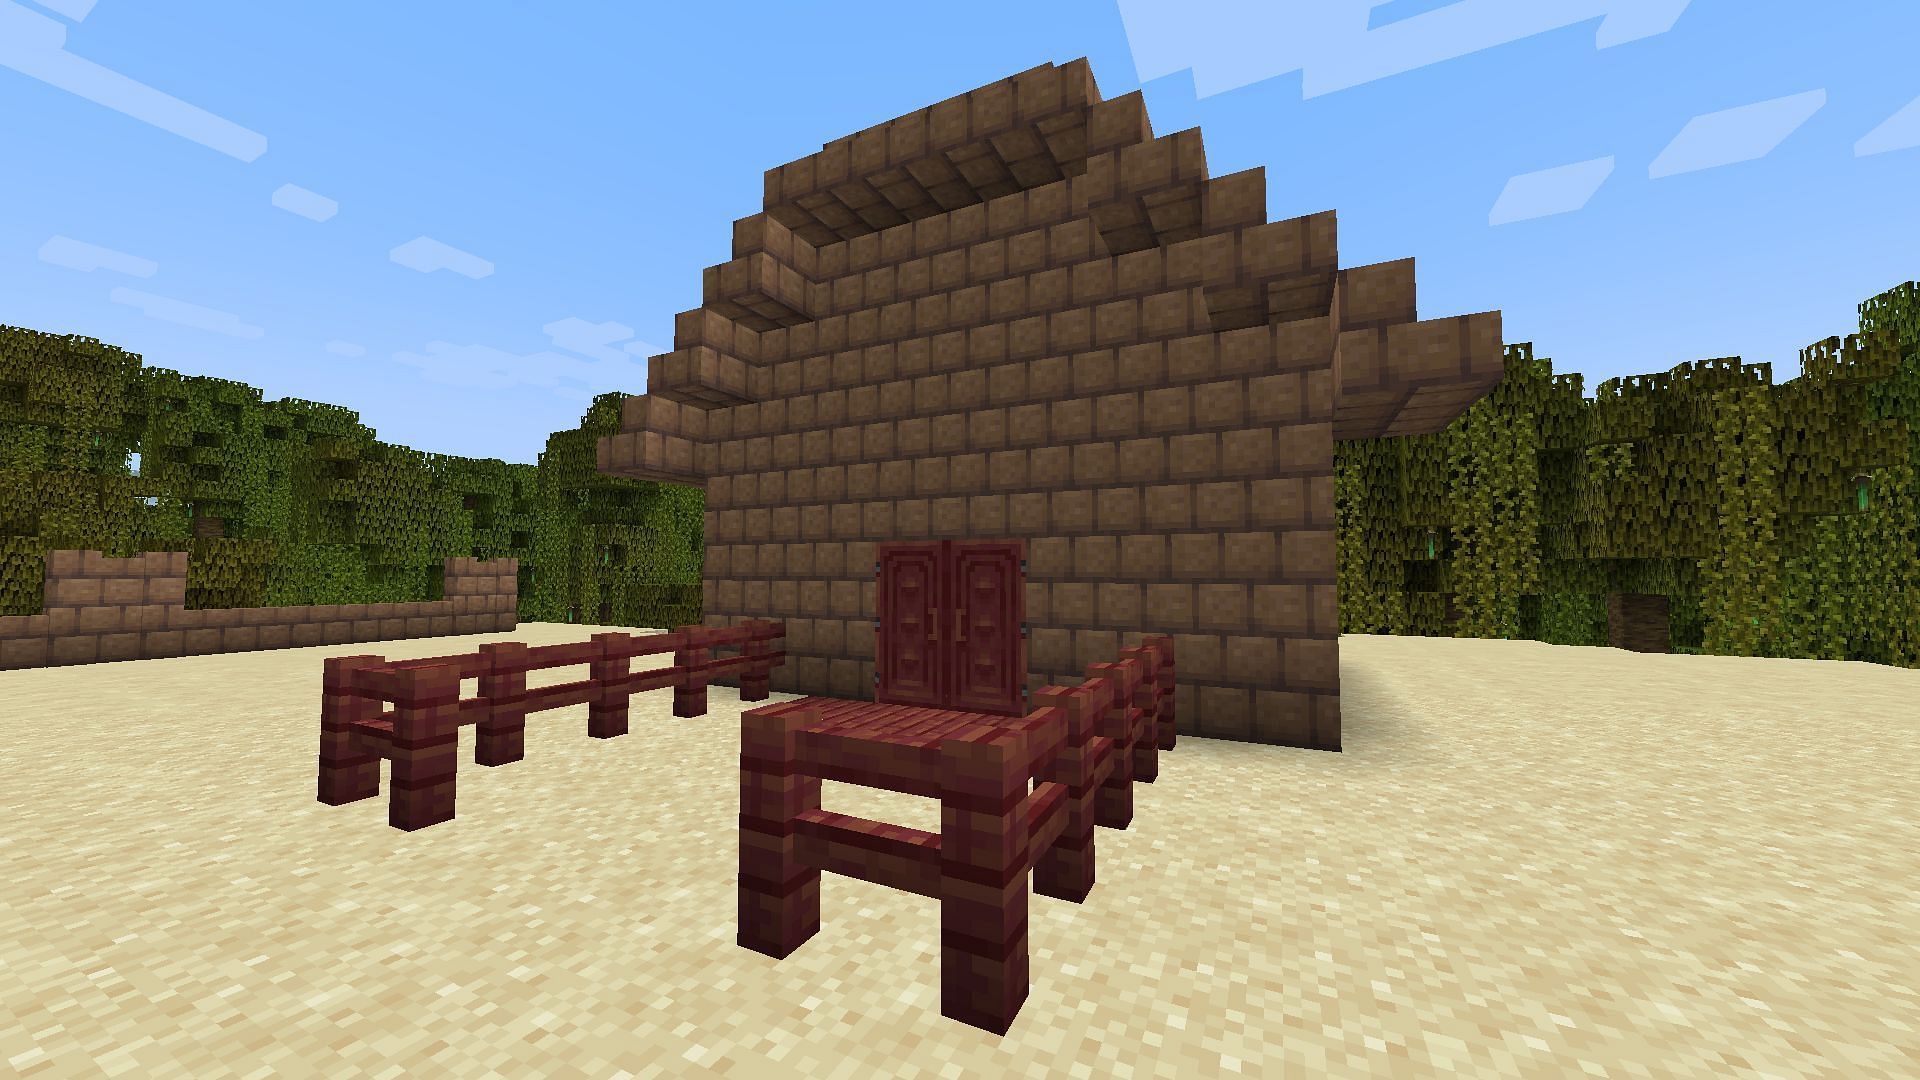 Mud bricks can be used to build huts (Image via Minecraft 1.19 update)